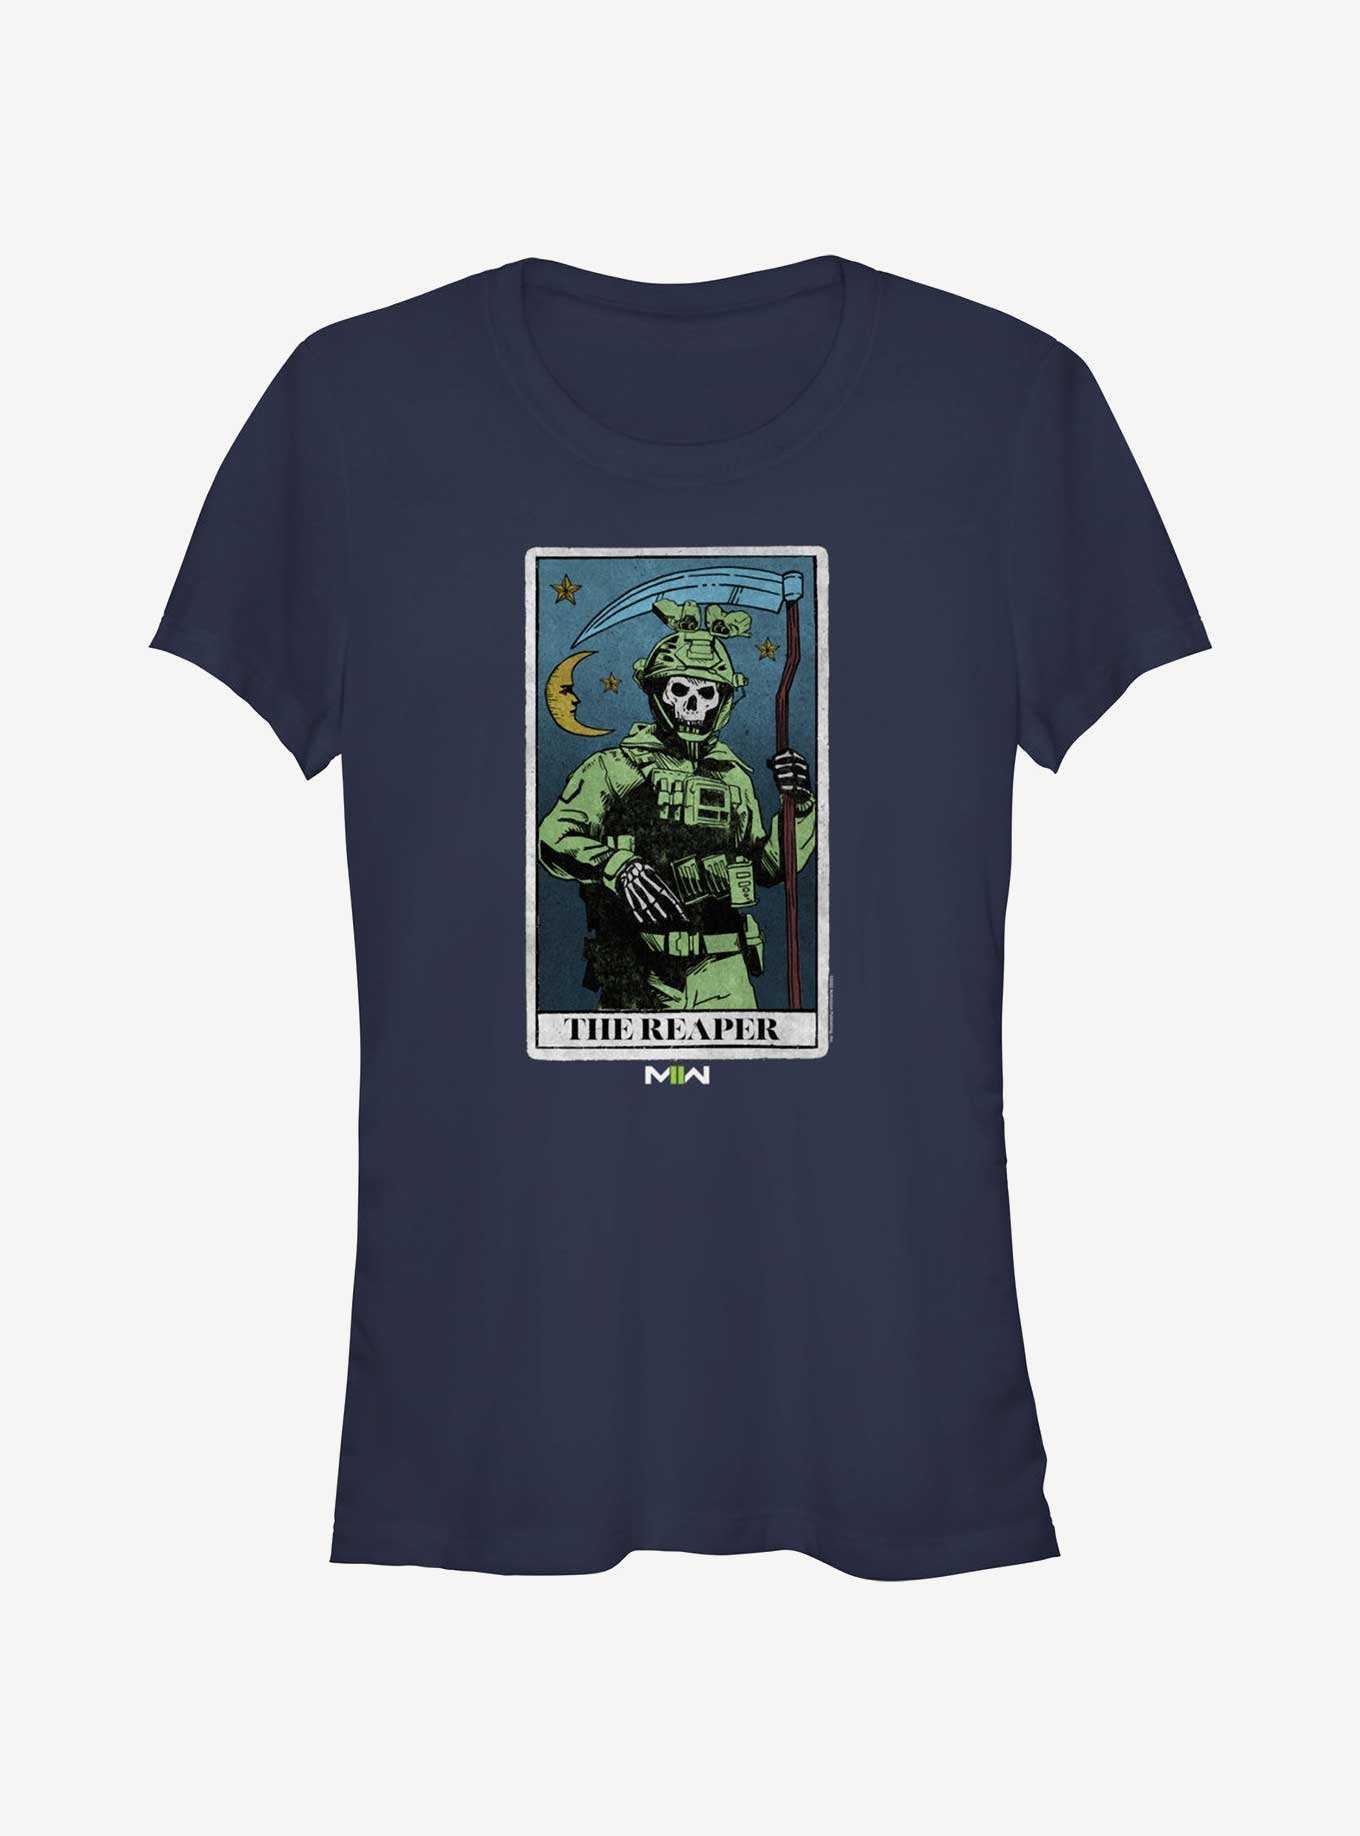 Call of Duty The Reaper Card Girls T-Shirt, , hi-res